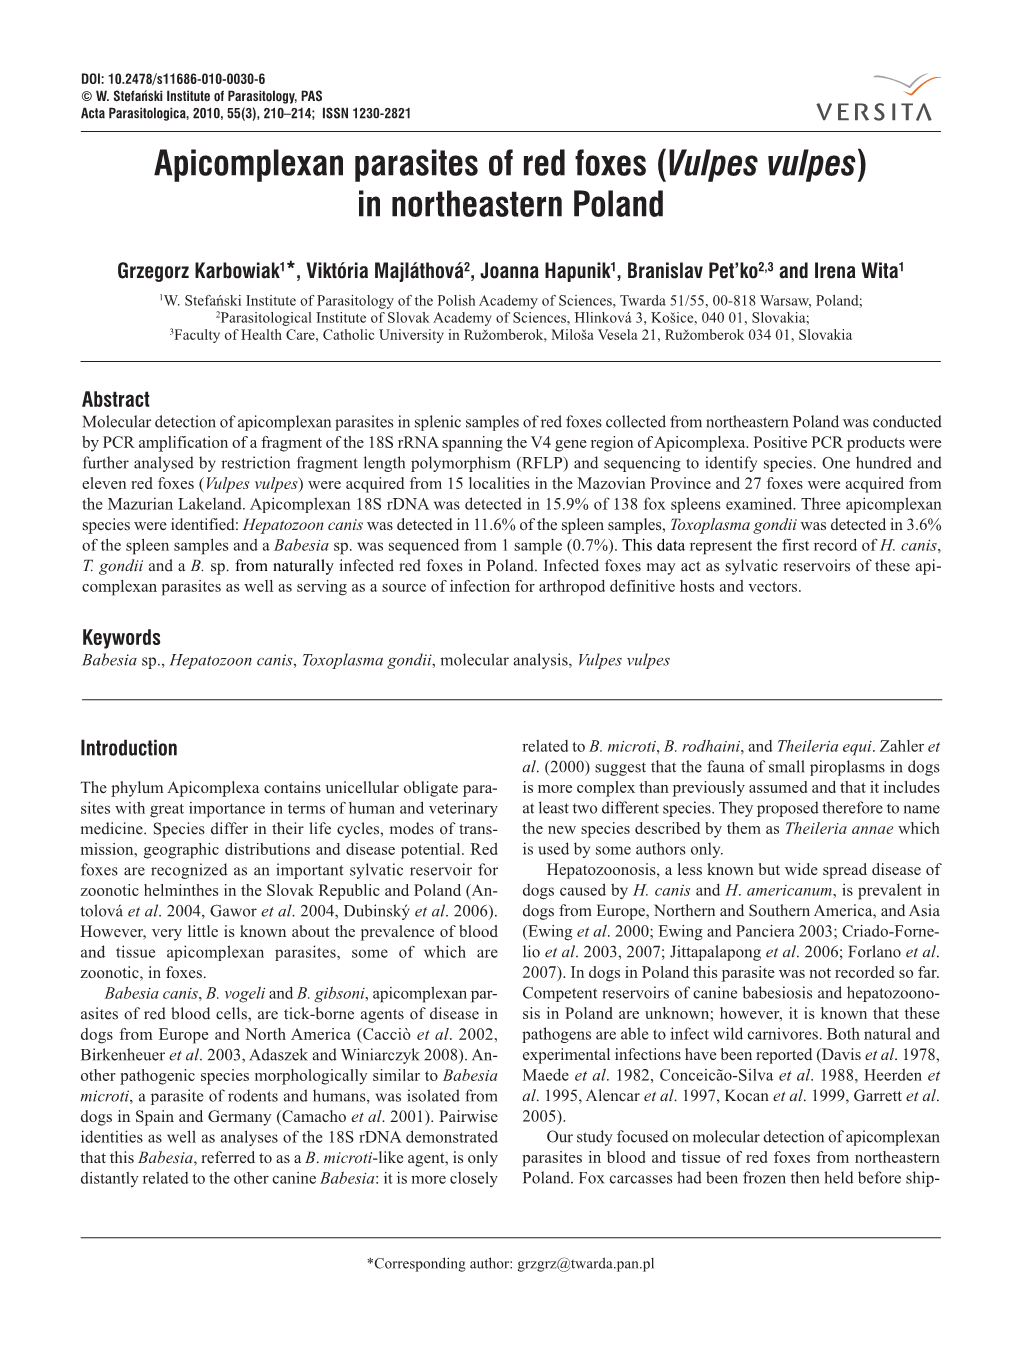 Apicomplexan Parasites of Red Foxes (Vulpes Vulpes) in Northeastern Poland